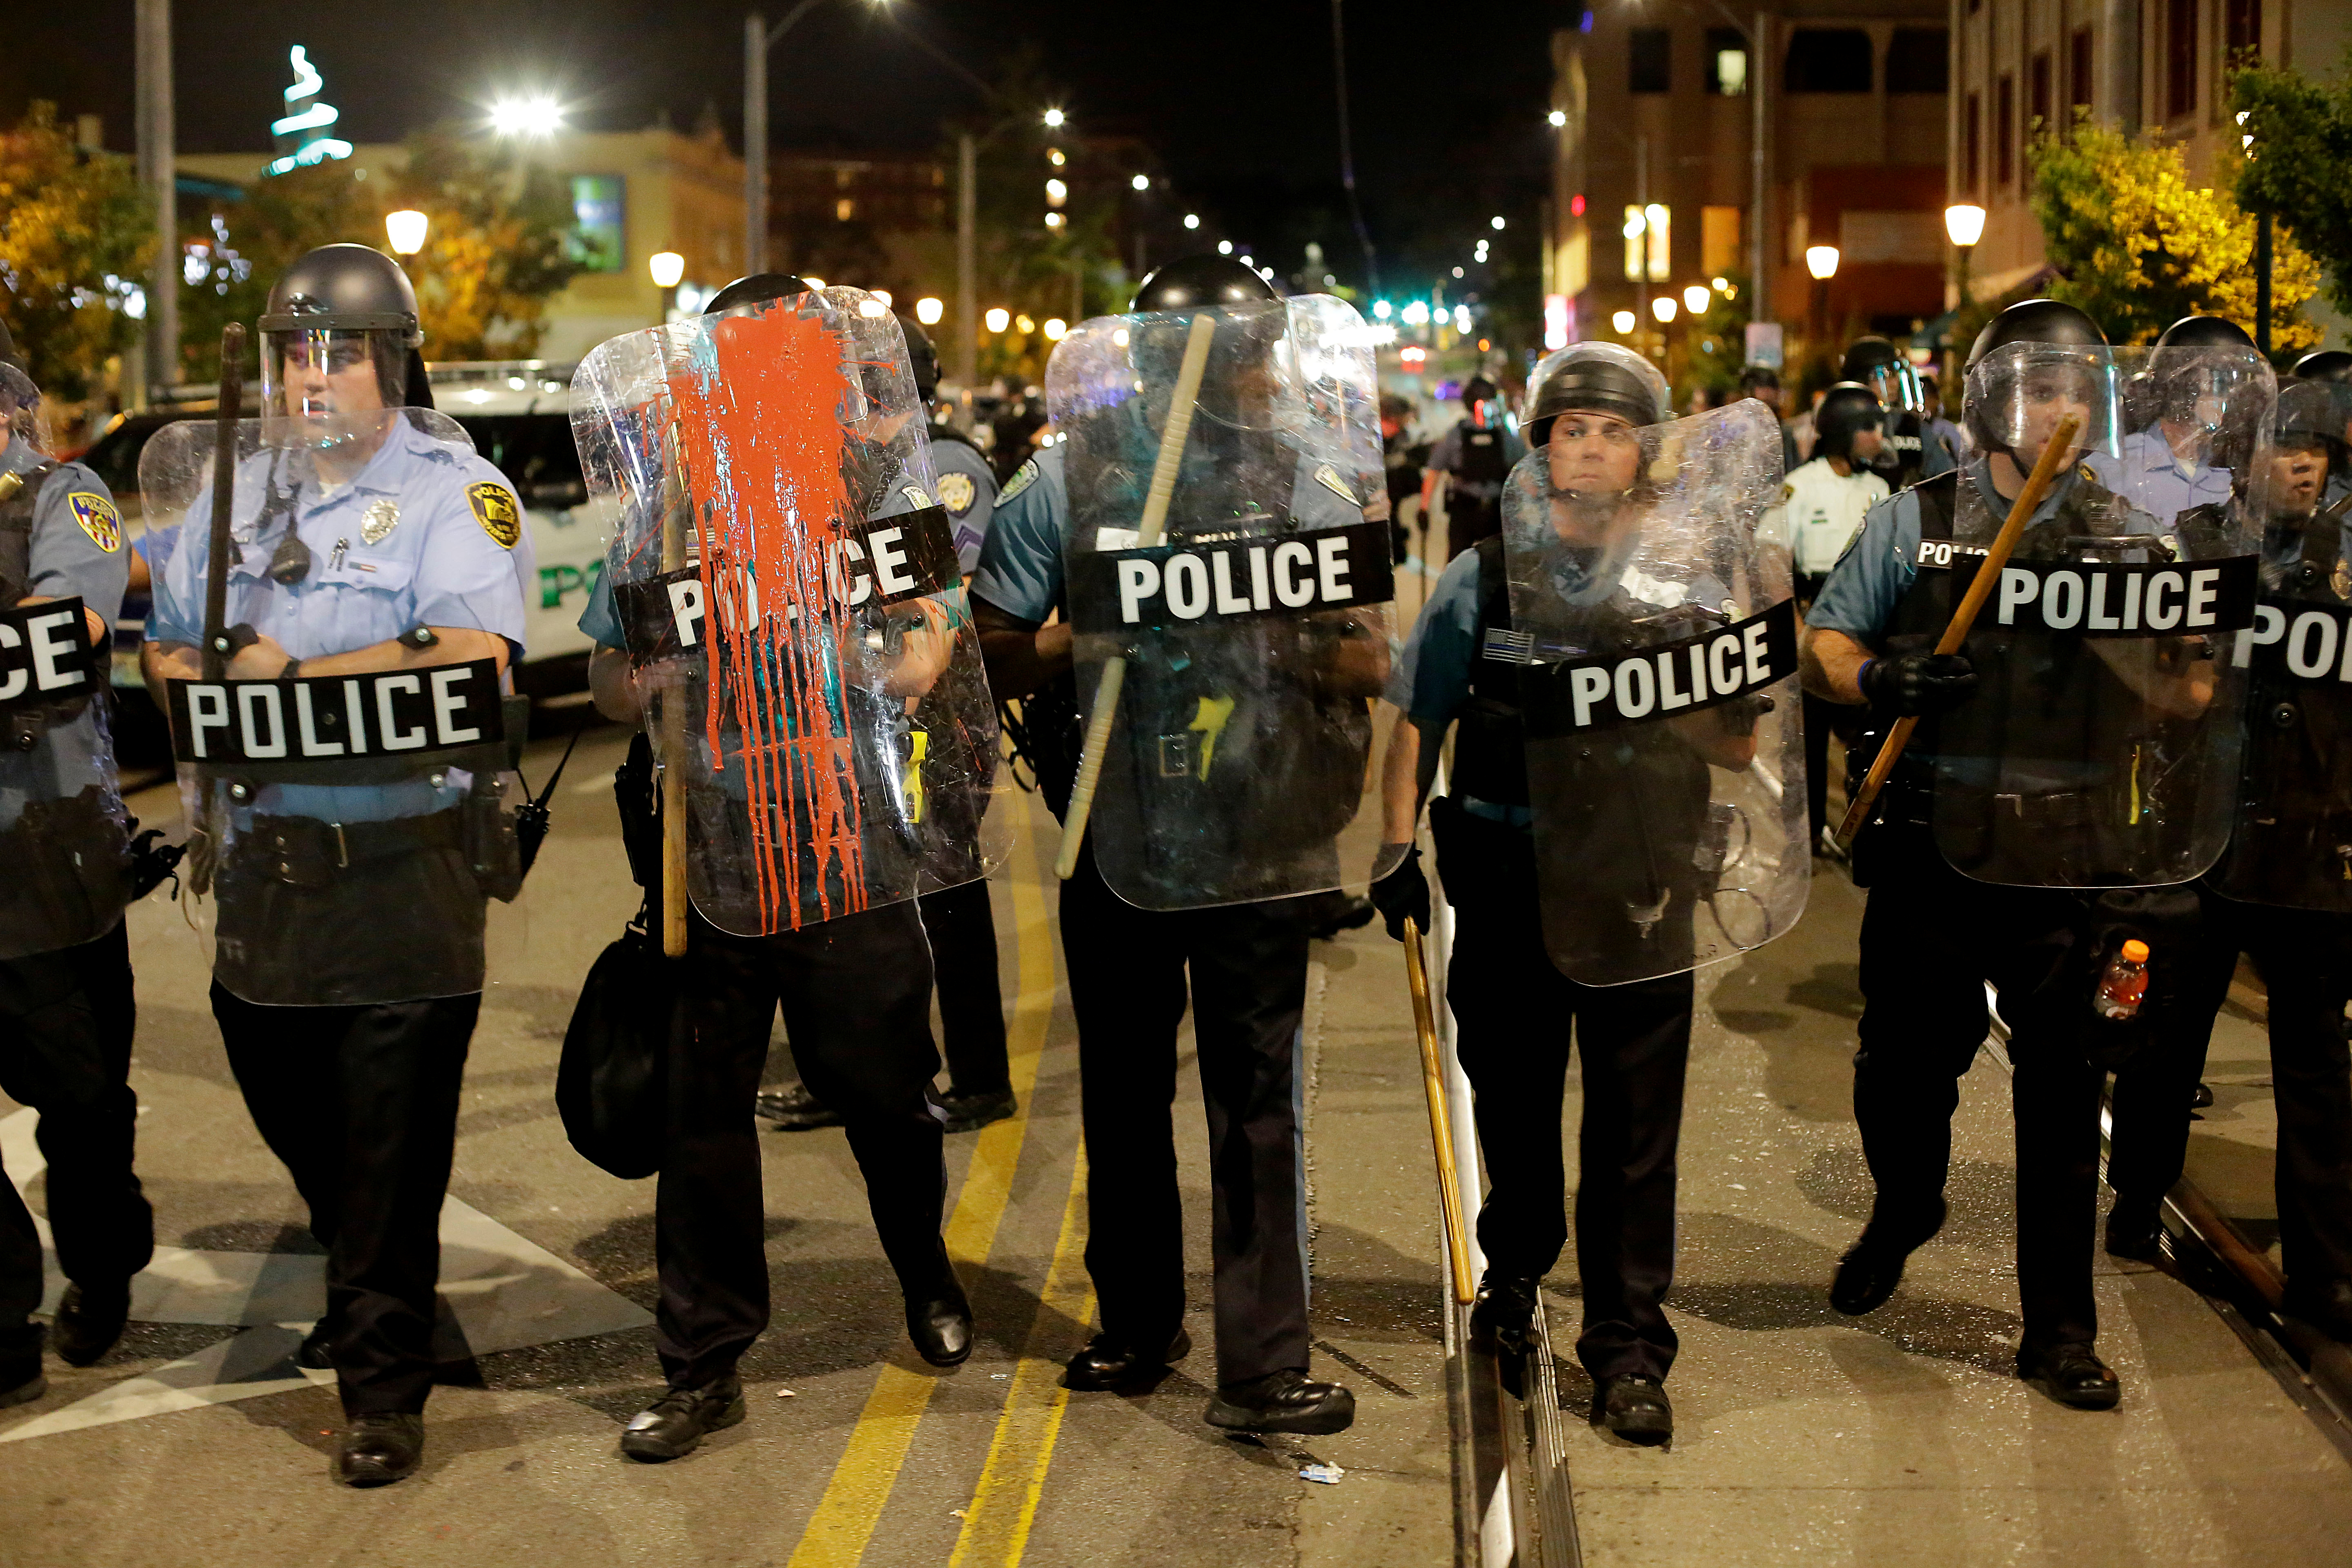 7 myths about “defunding the police” debunked